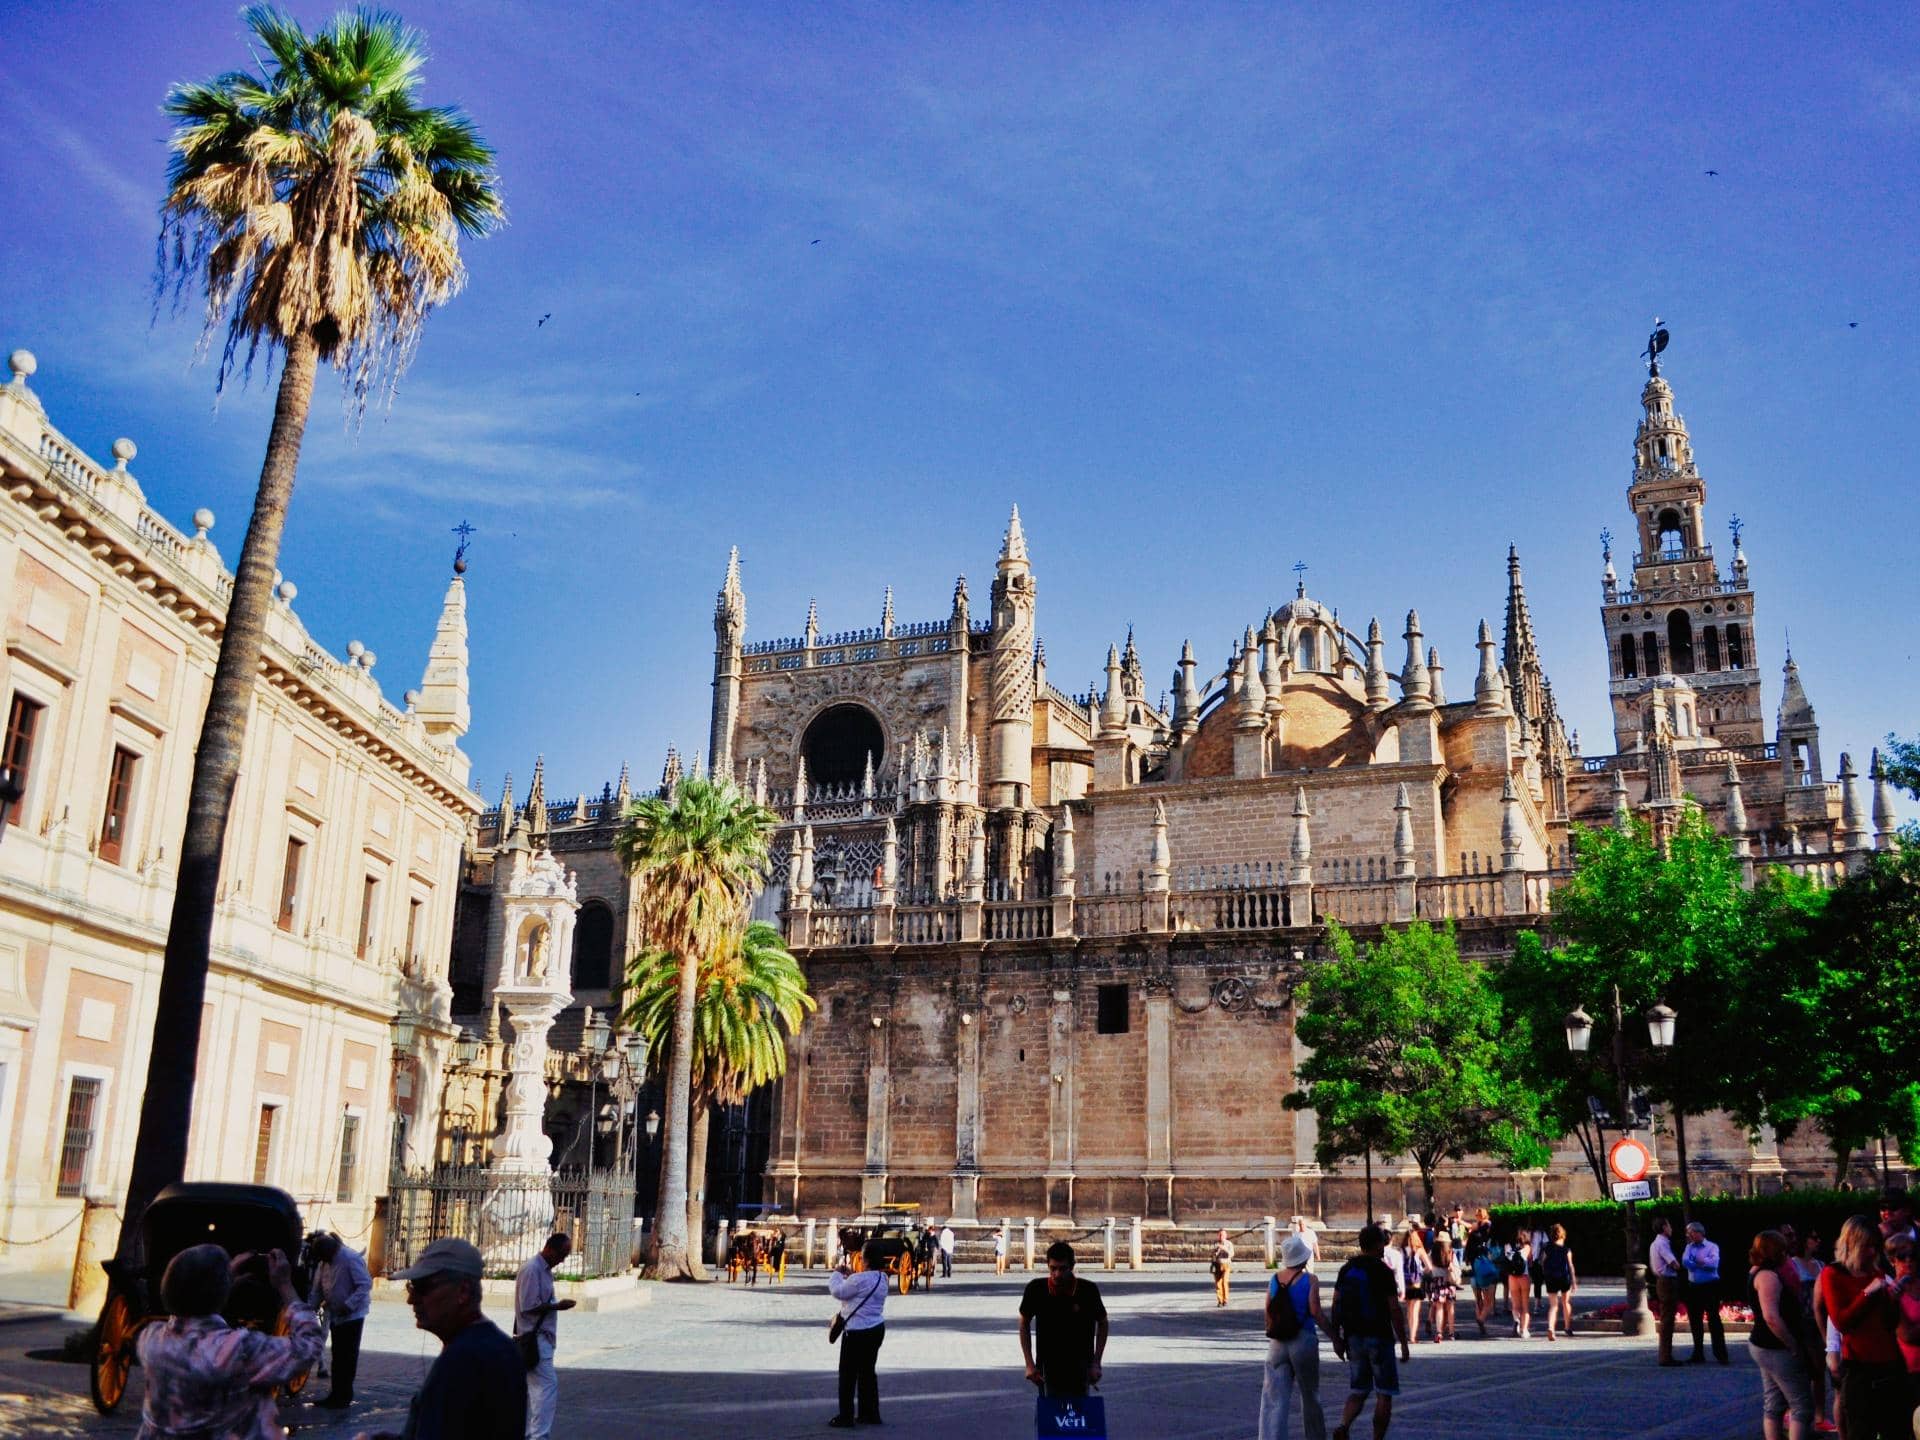 Seville Spain was built on stolen gold and, from the looks of the place, a shipload of it.